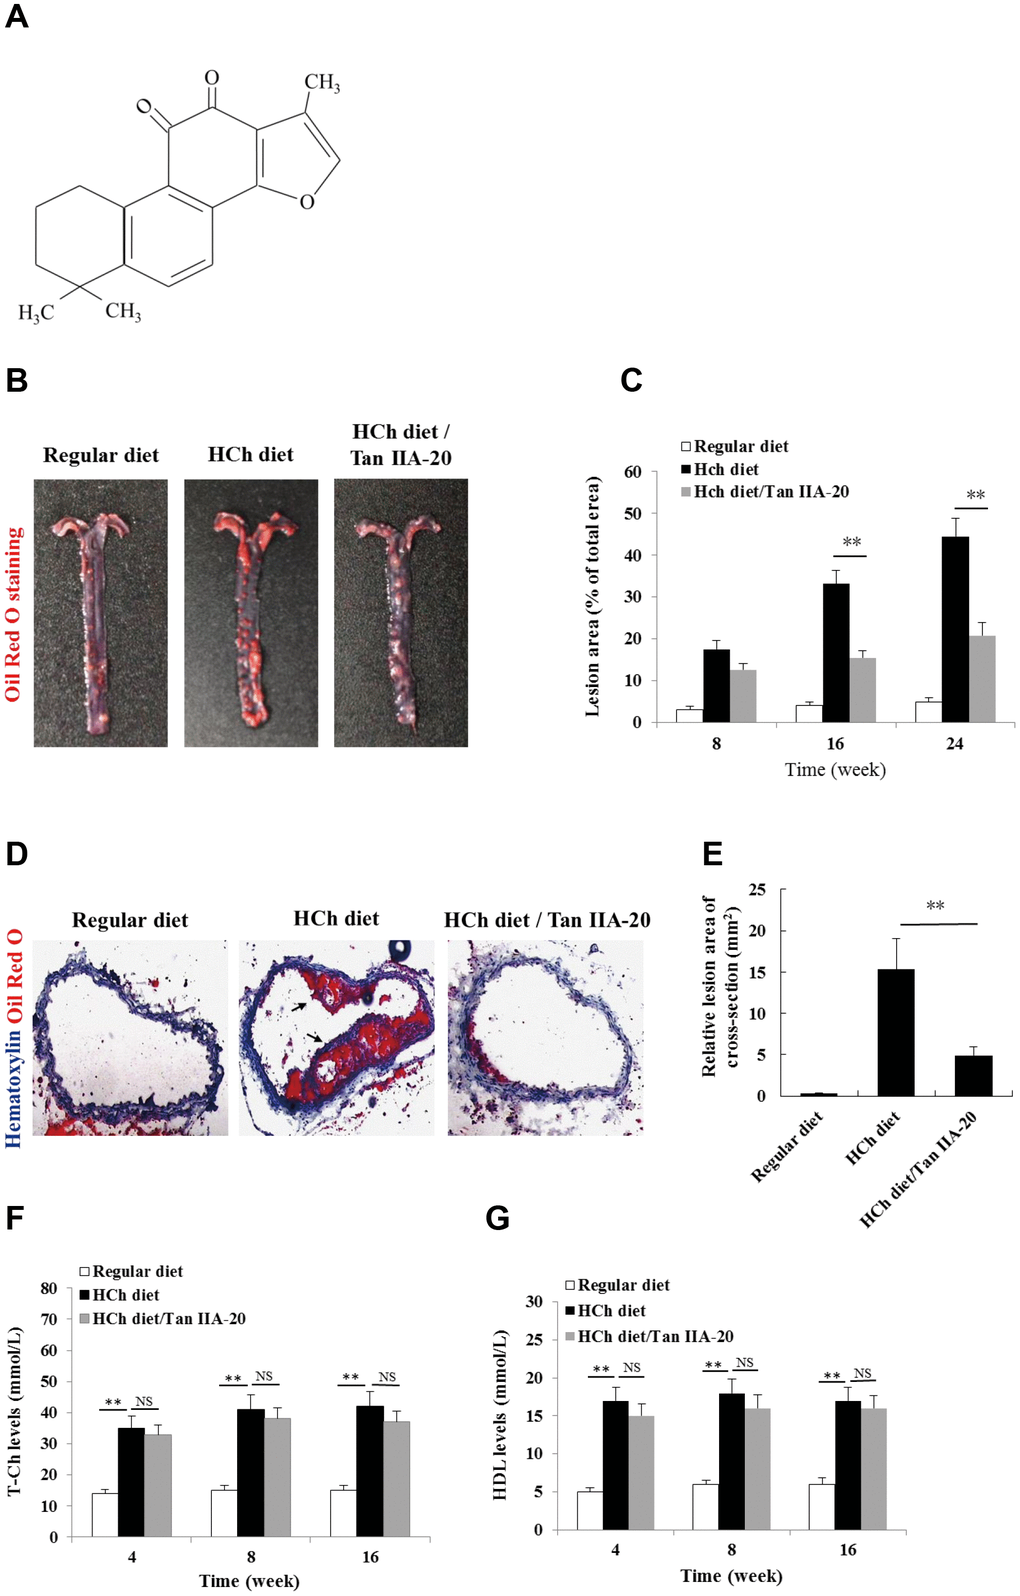 Effects of Tan IIA on HCh diet-induced AS lesion formation, serum lipid levels and cytokine productions in ApoE-/- mice. (A) Molecular structure of Tanshinone IIA. (B) AS lesions stained by Oil Red O in the aorta of ApoE-deficient mice fed on the different diets (regular diet, HCh diet and HCh diet plus Tan IIA (20 mg/kg/day)). (C) Percentage of the lesion area of the aorta was calculated as the ratio of the lesion area to the total area. (D) Histological images of frozen section of the lesions stained with Oil Red O and Haematoxylin/eosin (HE). (E) Relative lesion area of the section of AS in the aorta. Average areas of AS lesions were calculated from 12 sections in ApoE-deficient mice fed on the different diets. (F–G) Levels of T-Ch and HDL-Ch in the sera of ApoE-deficient mice fed with different diets for 16 weeks.